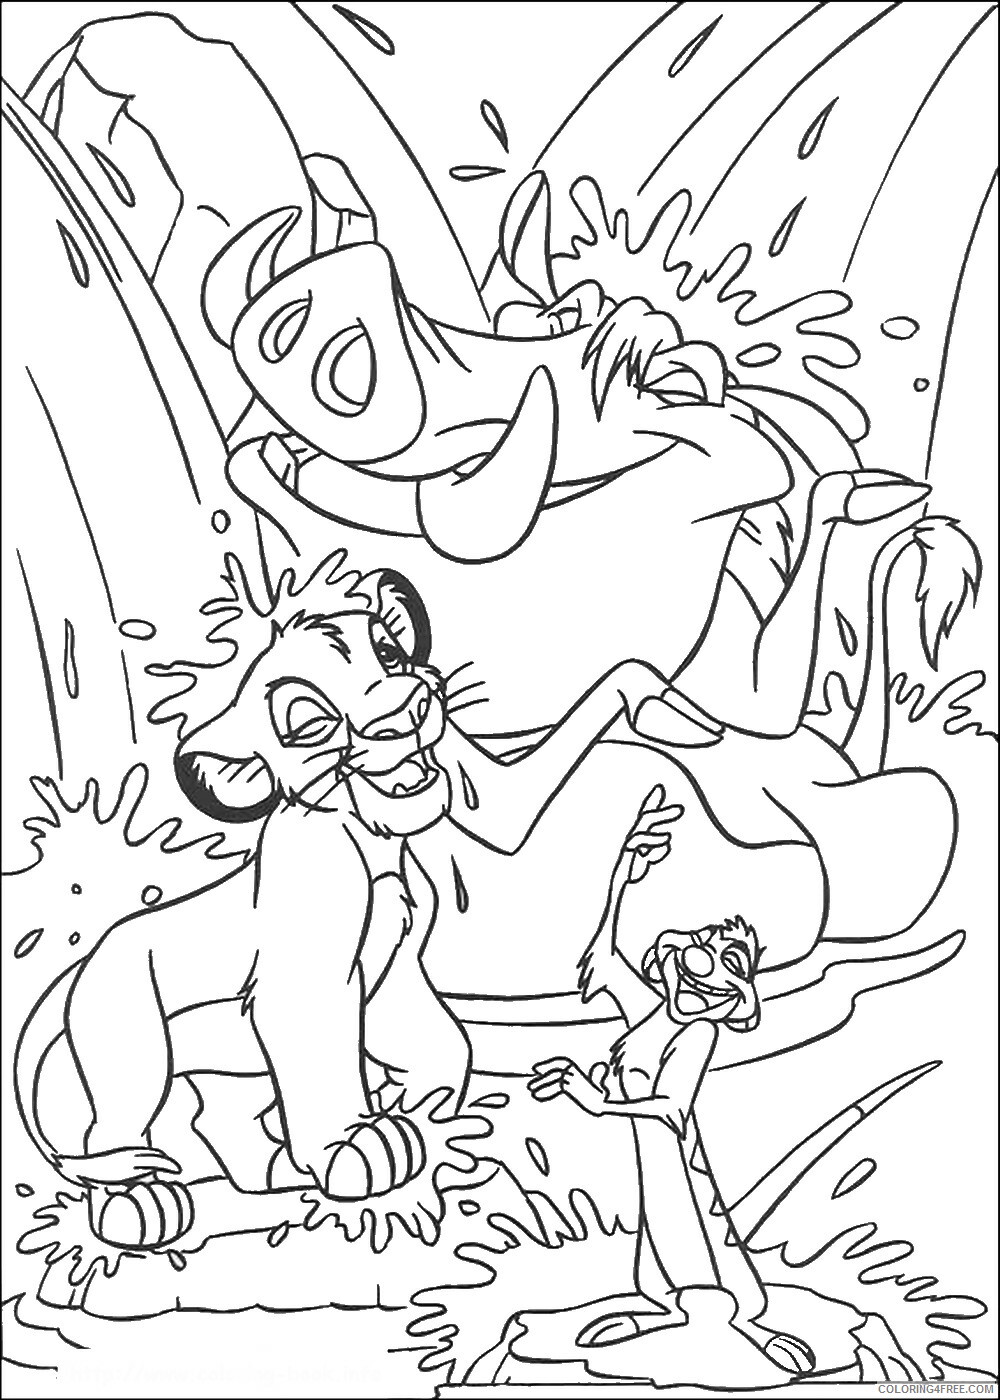 The Lion King Coloring Pages TV Film lionking_24 Printable 2020 09153 Coloring4free